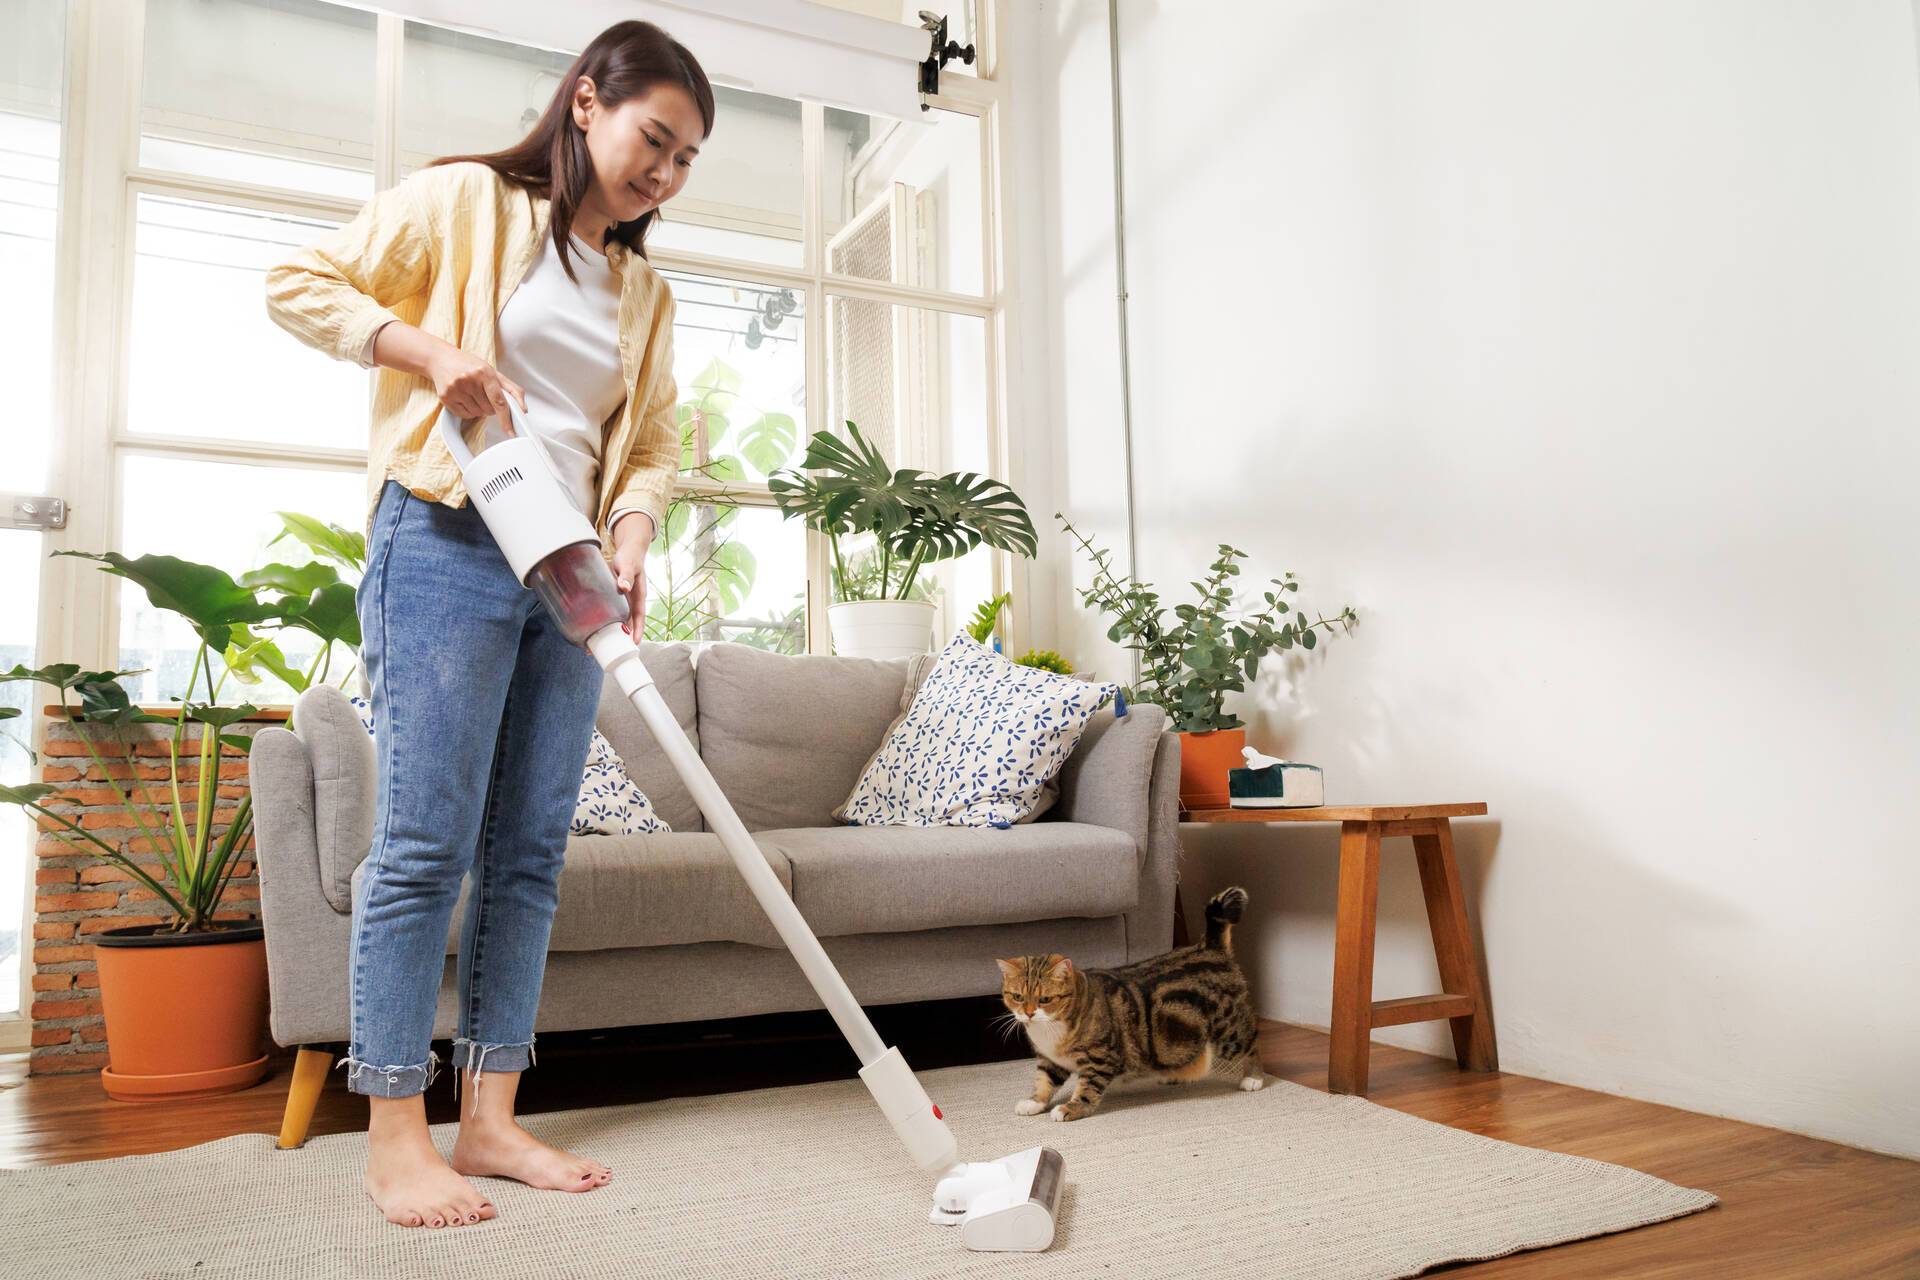 A woman vaccuuming her carpet with her cat nearby